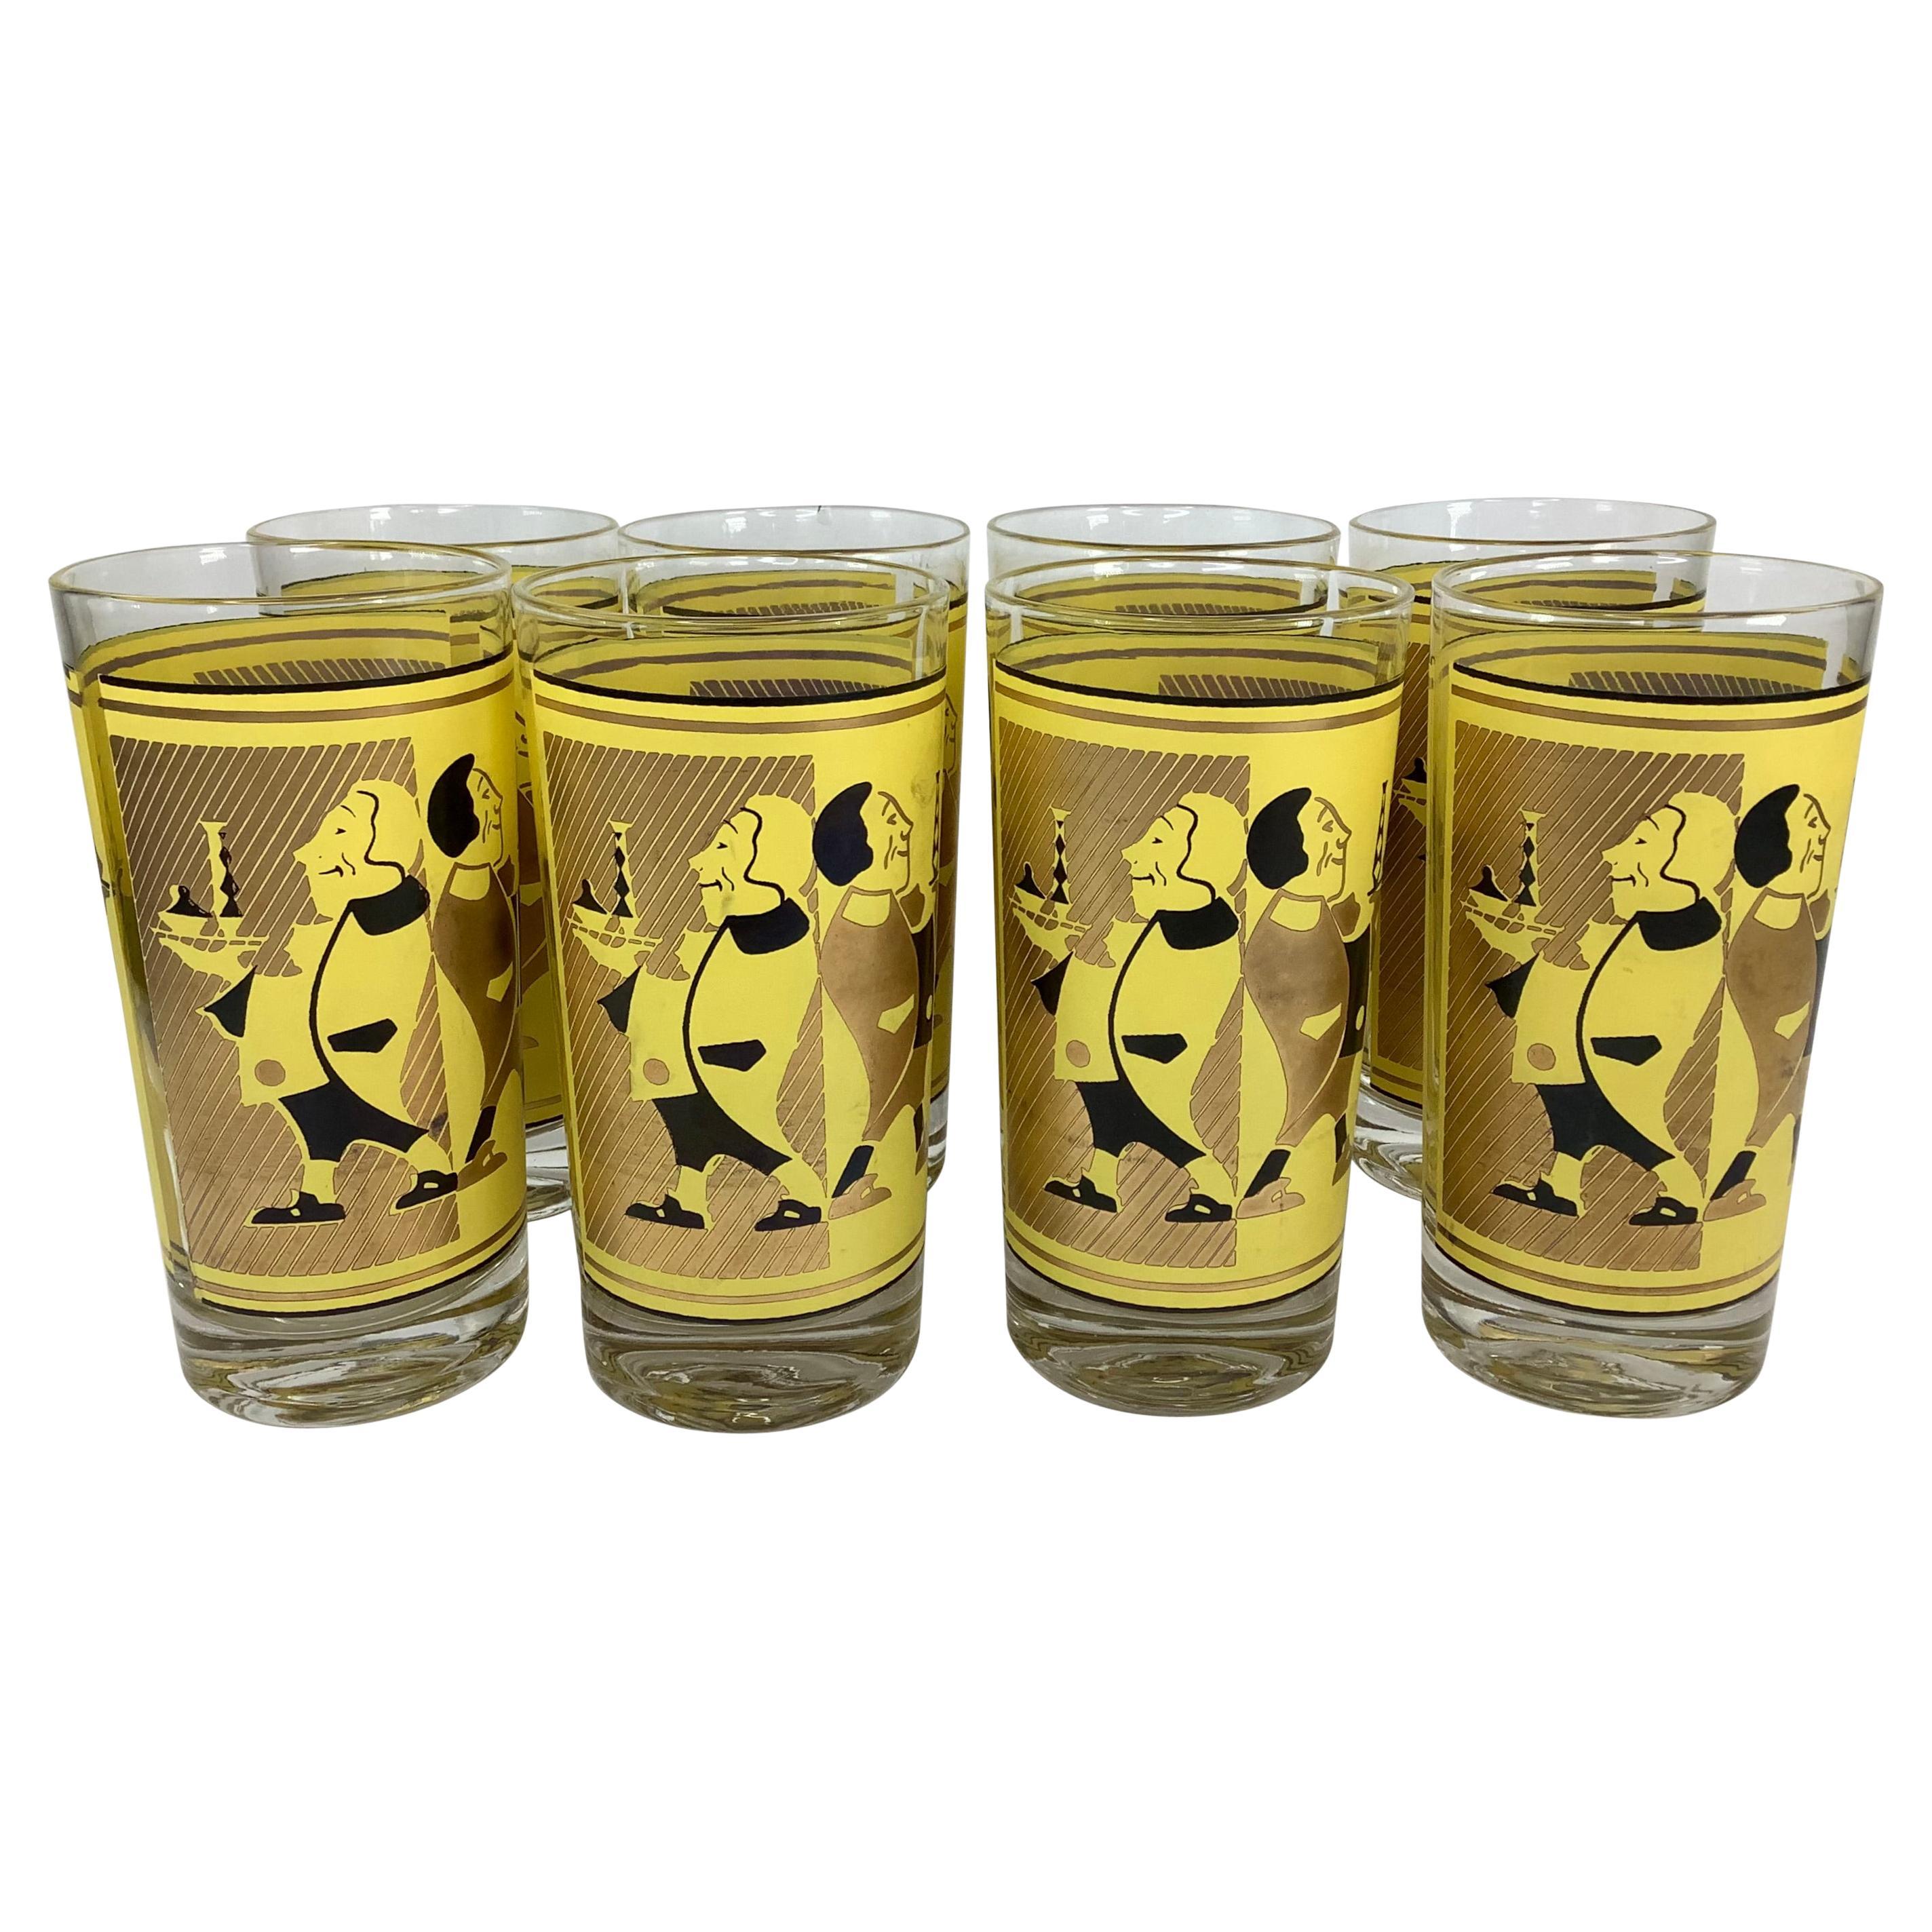 Vintage Yellow Gold and Black Highball Glasses With Serving Waiters - Set of 8 For Sale